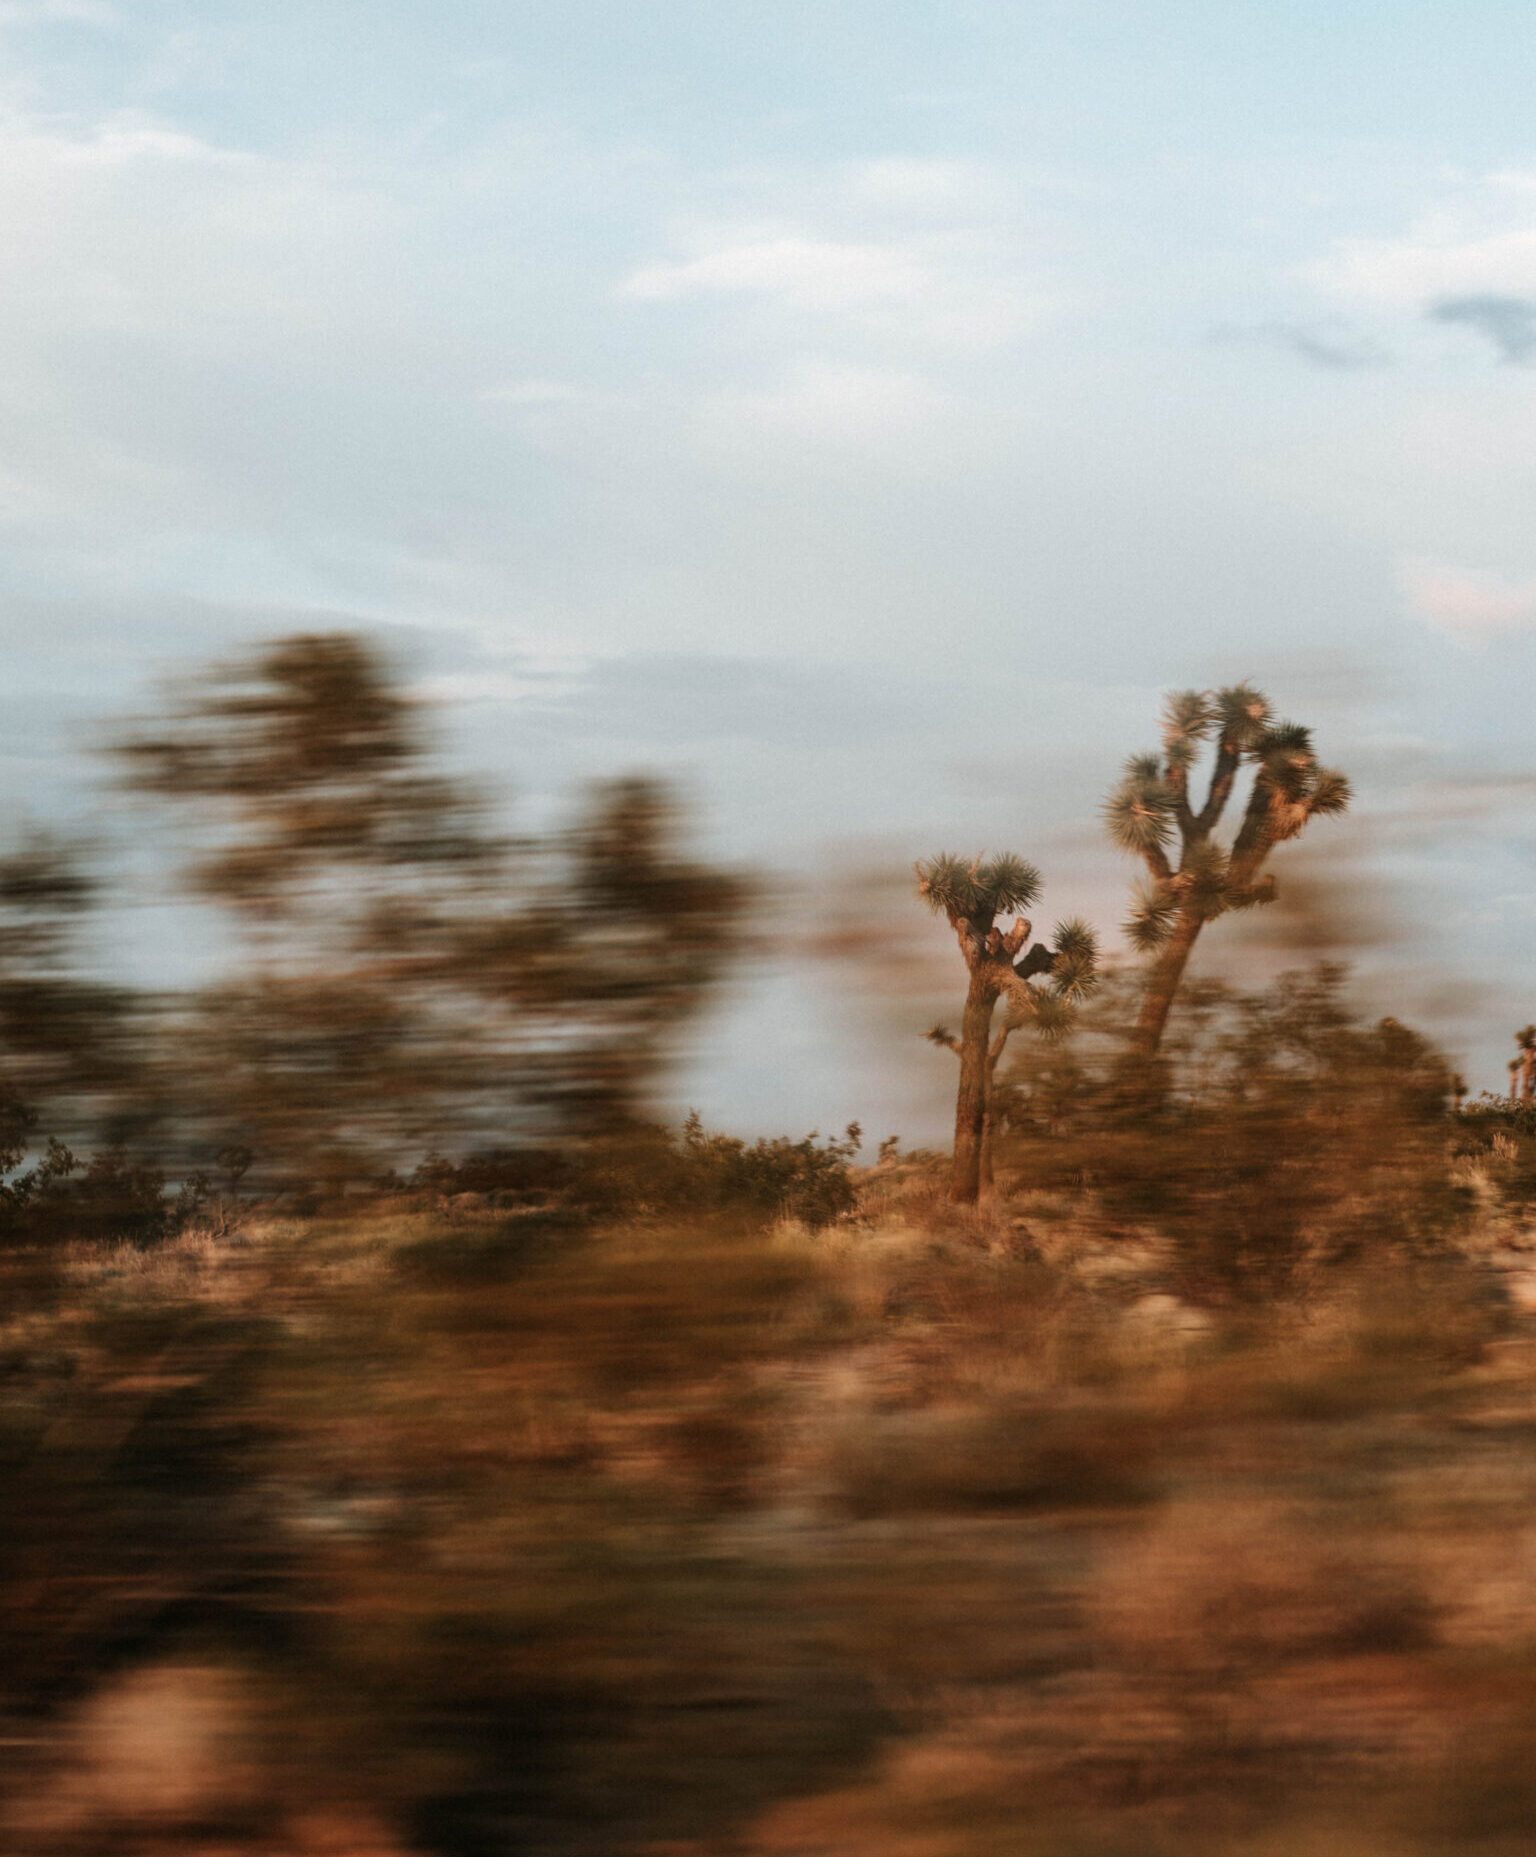 A guide to Joshua Tree, California | Blurry depiction of desert trees